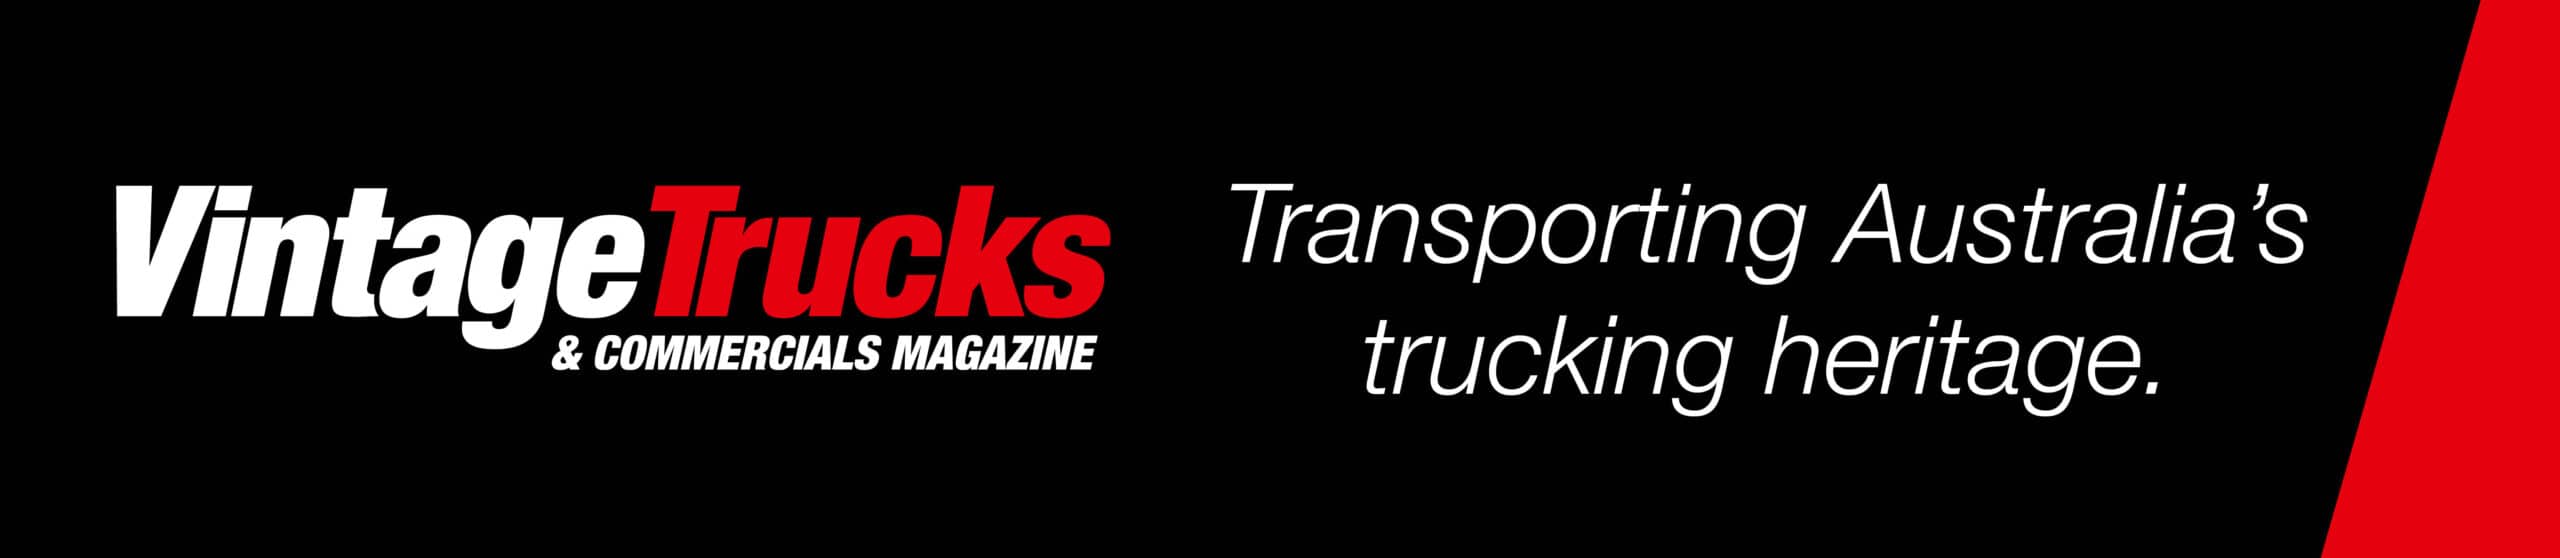 Vintage Trucks and Commercials Magazine